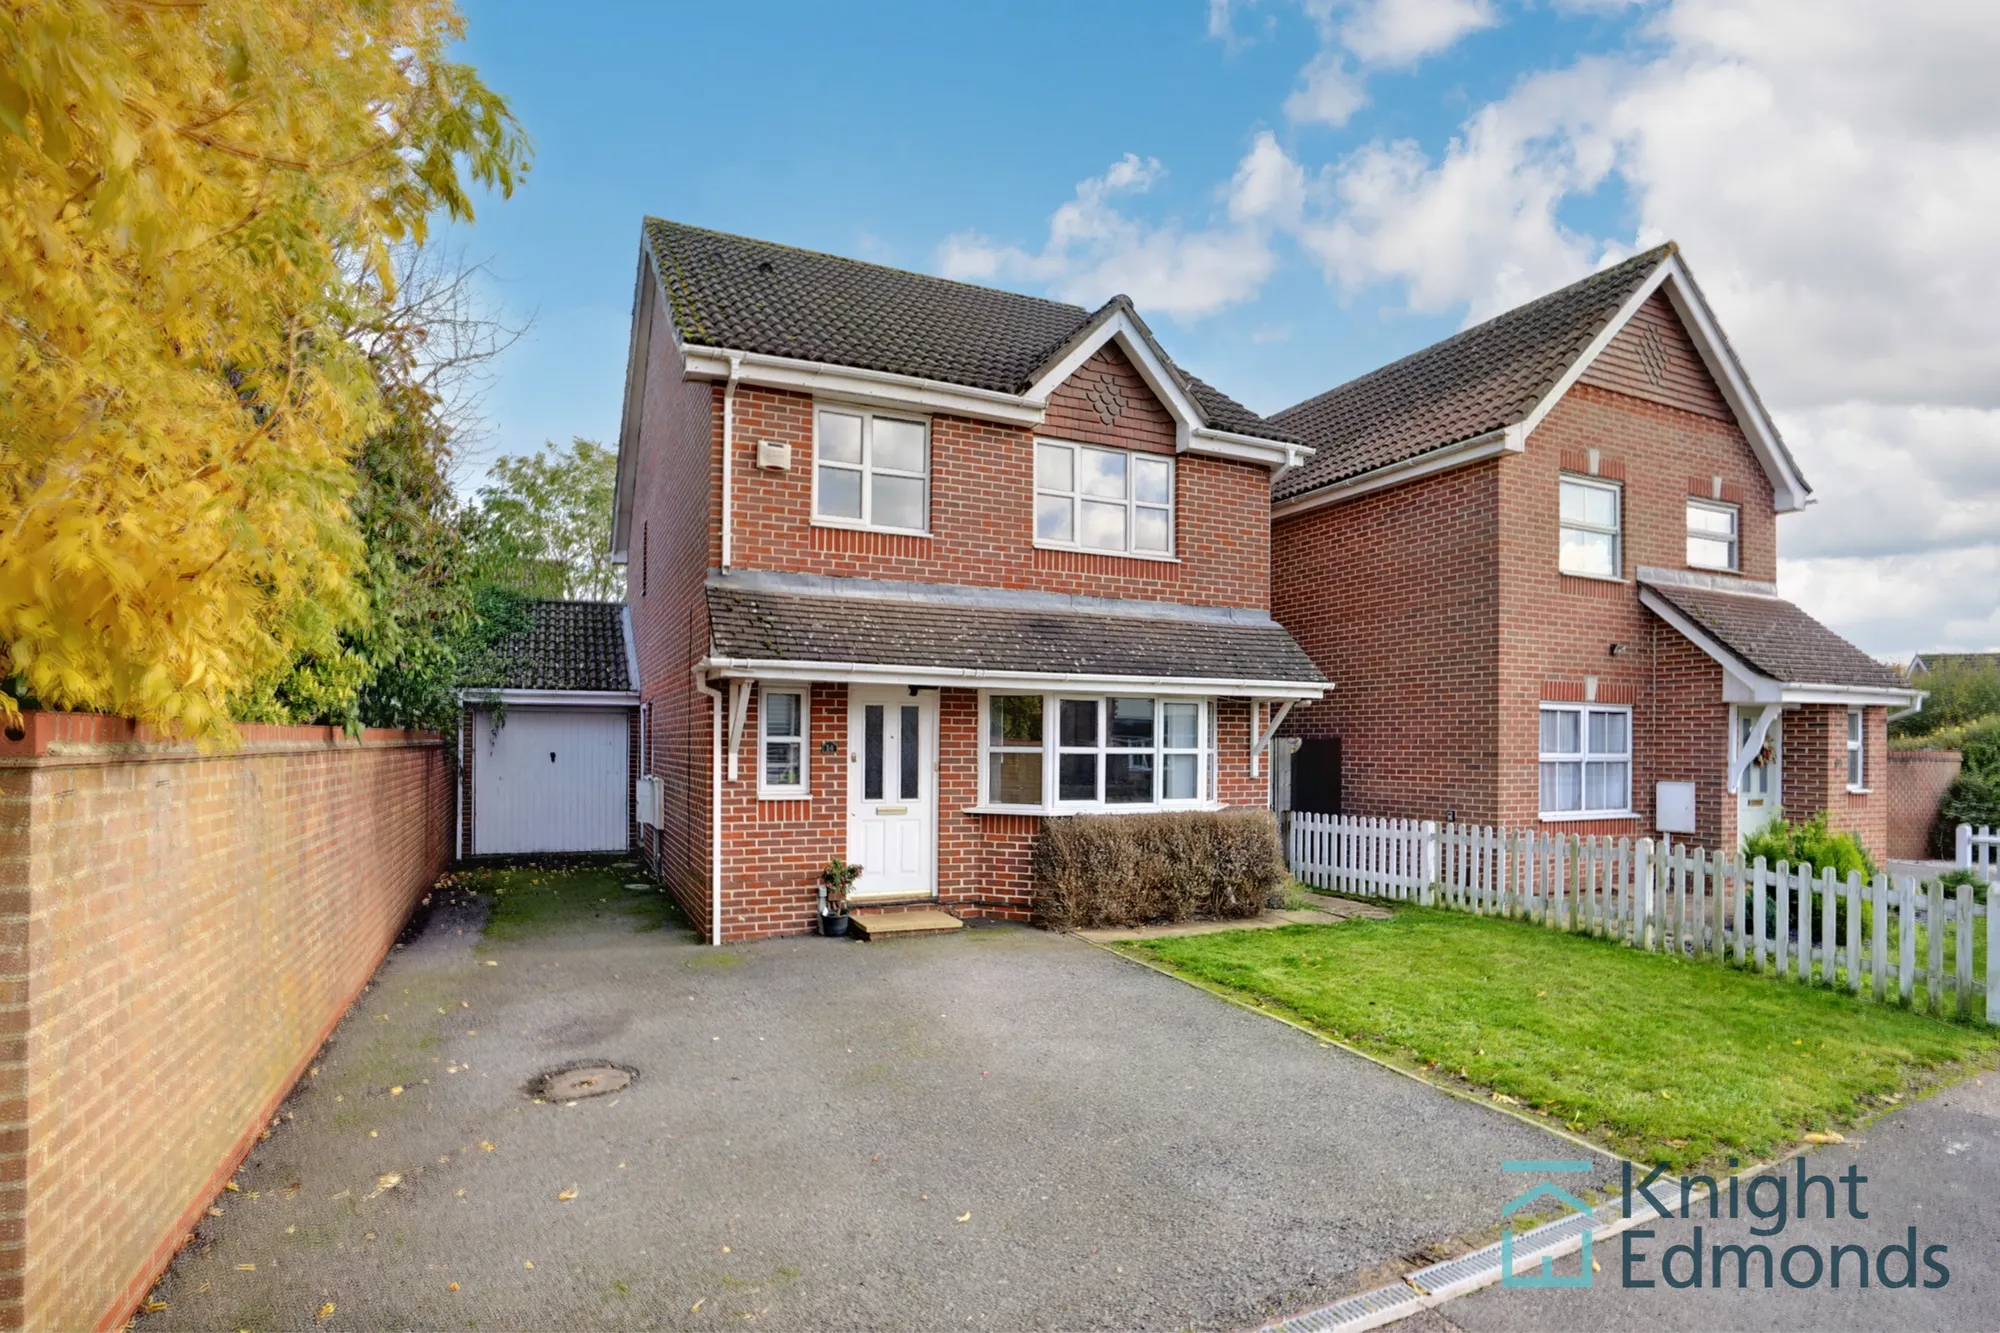 4 bed detached house for sale in Joy Wood, Maidstone - Property Image 1